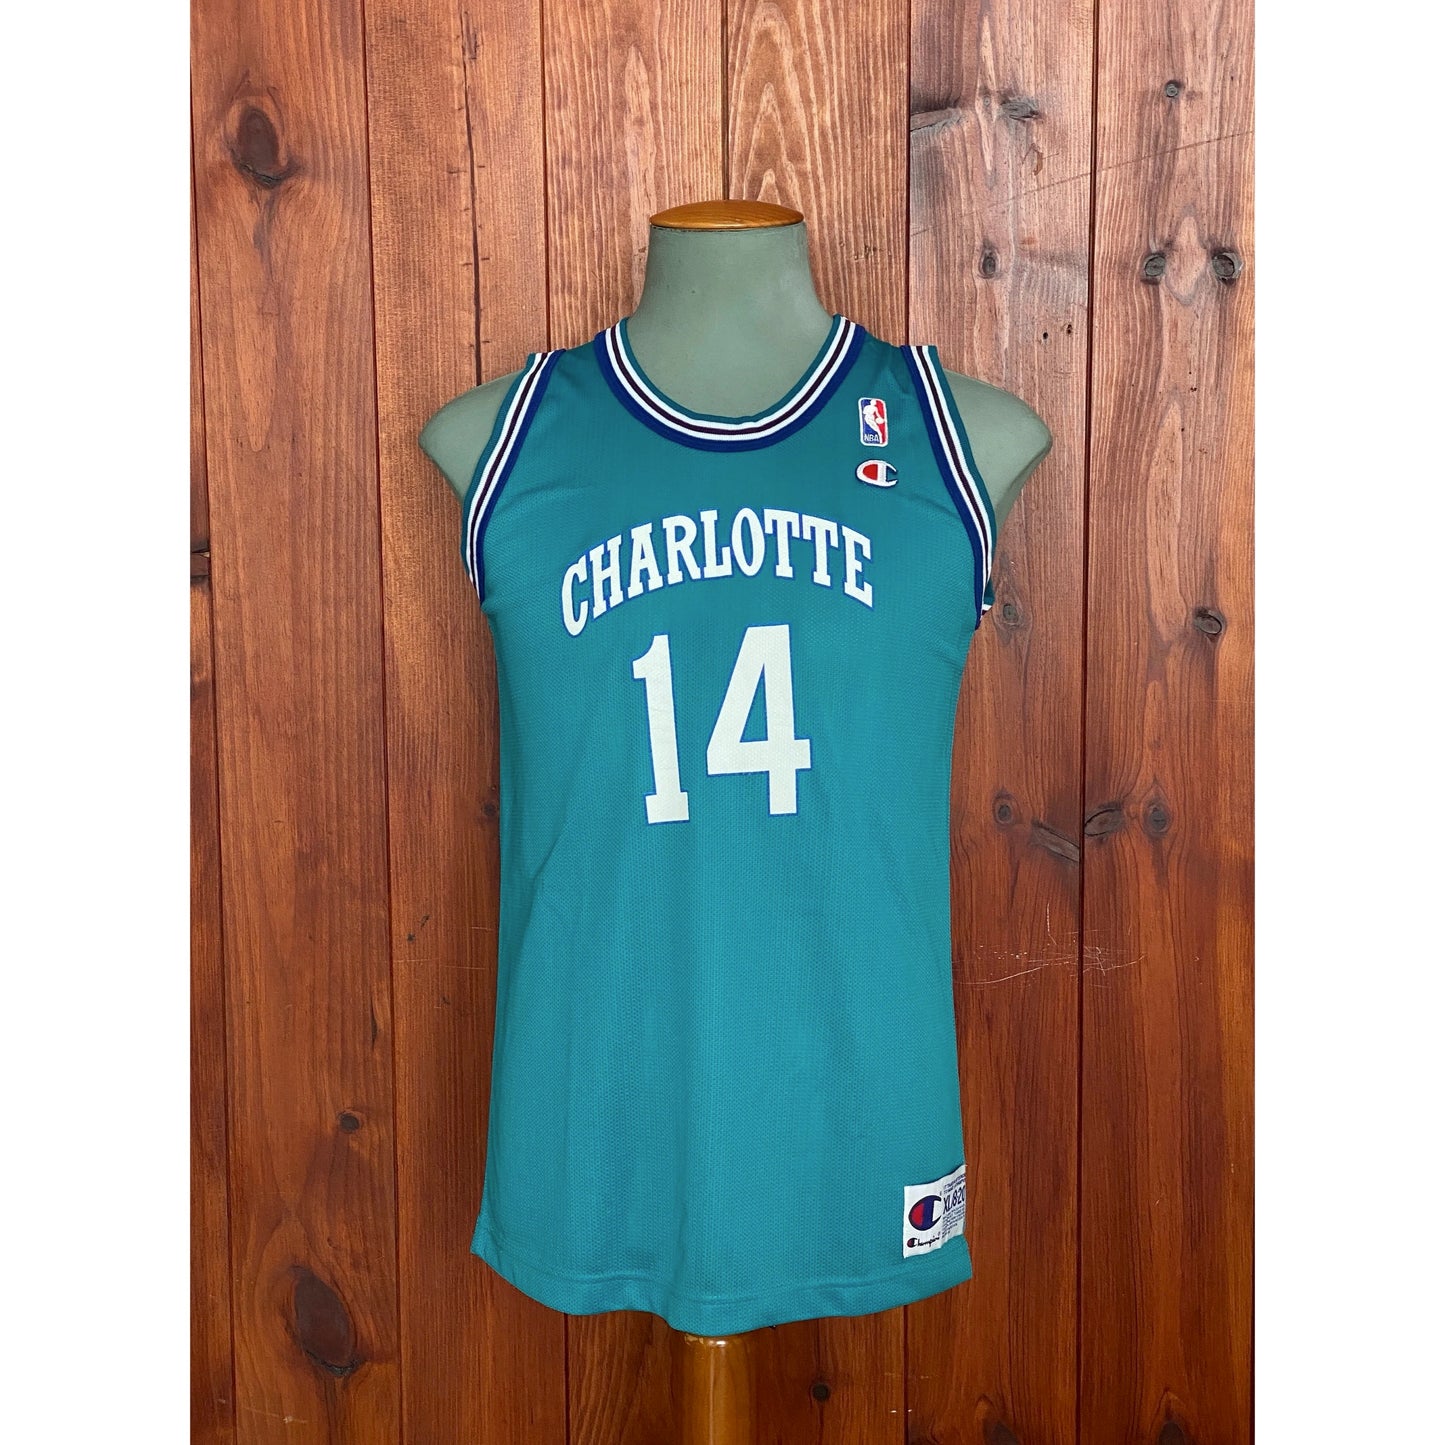 Youth 18-20. Vintage 90s NBA Champion Mason #14 Jersey Charlotte Hornets Made In USA